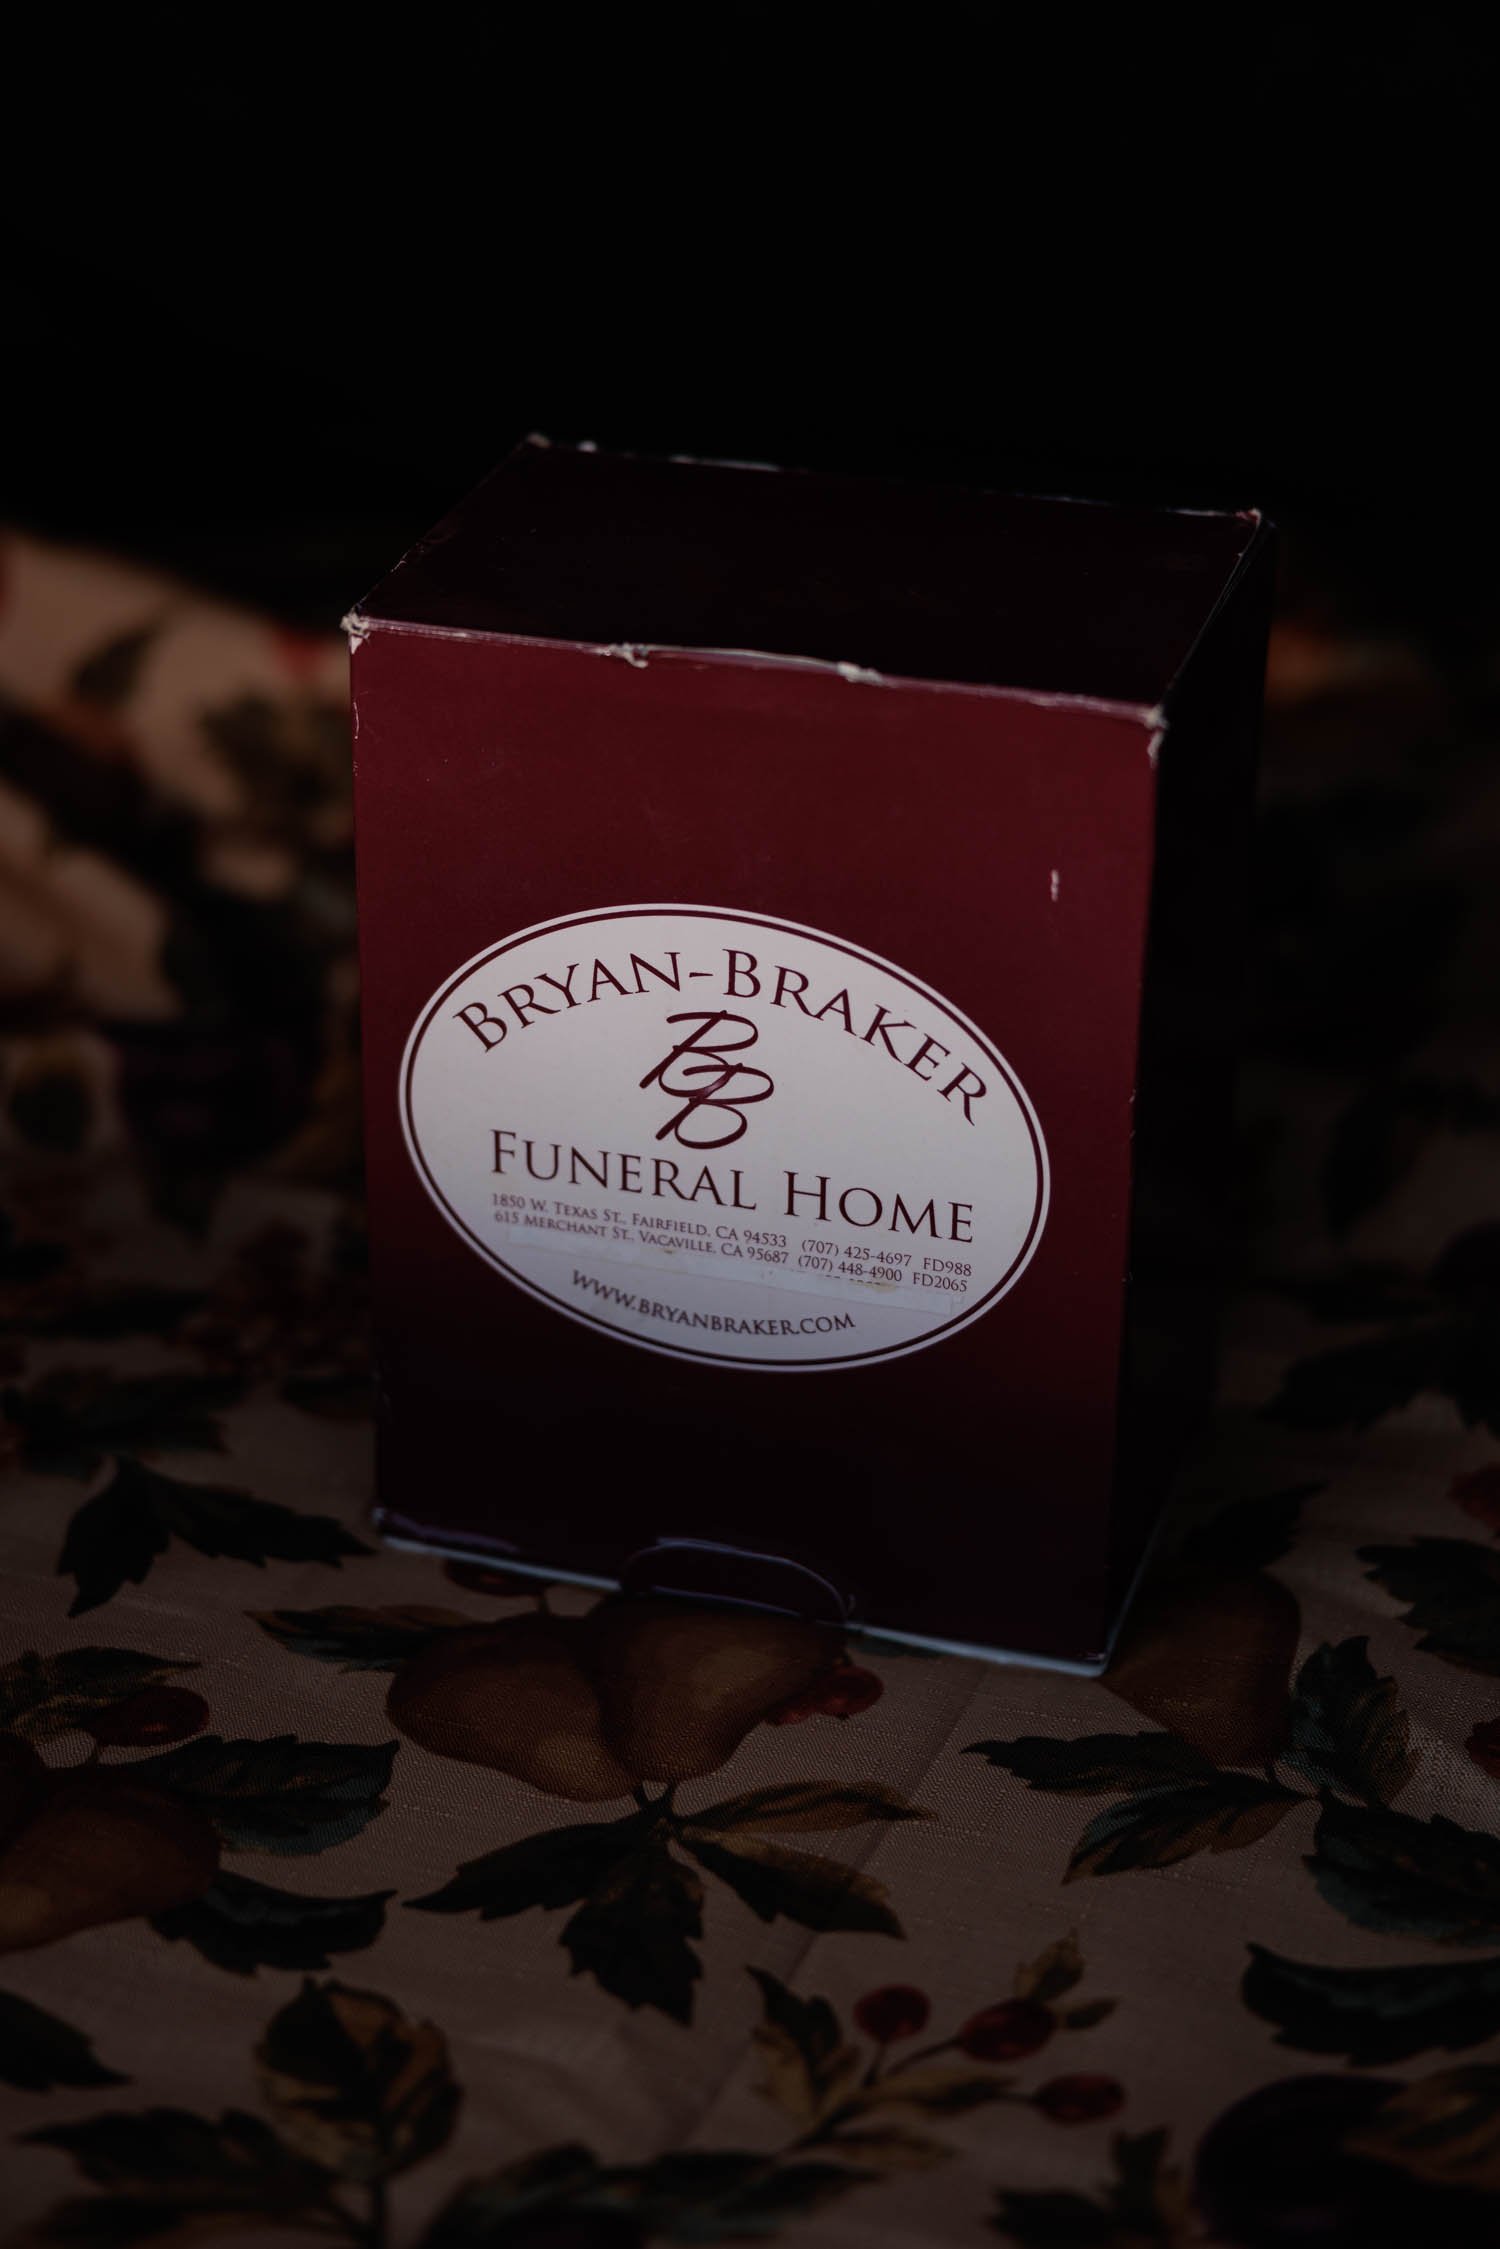 Close-up of a dark red box with the logo of Bryan-Braker Funeral Home printed in white. The box is slightly worn at the edges and sits against a dark, floral-patterned backdrop, giving it a somber and dignified appearance.